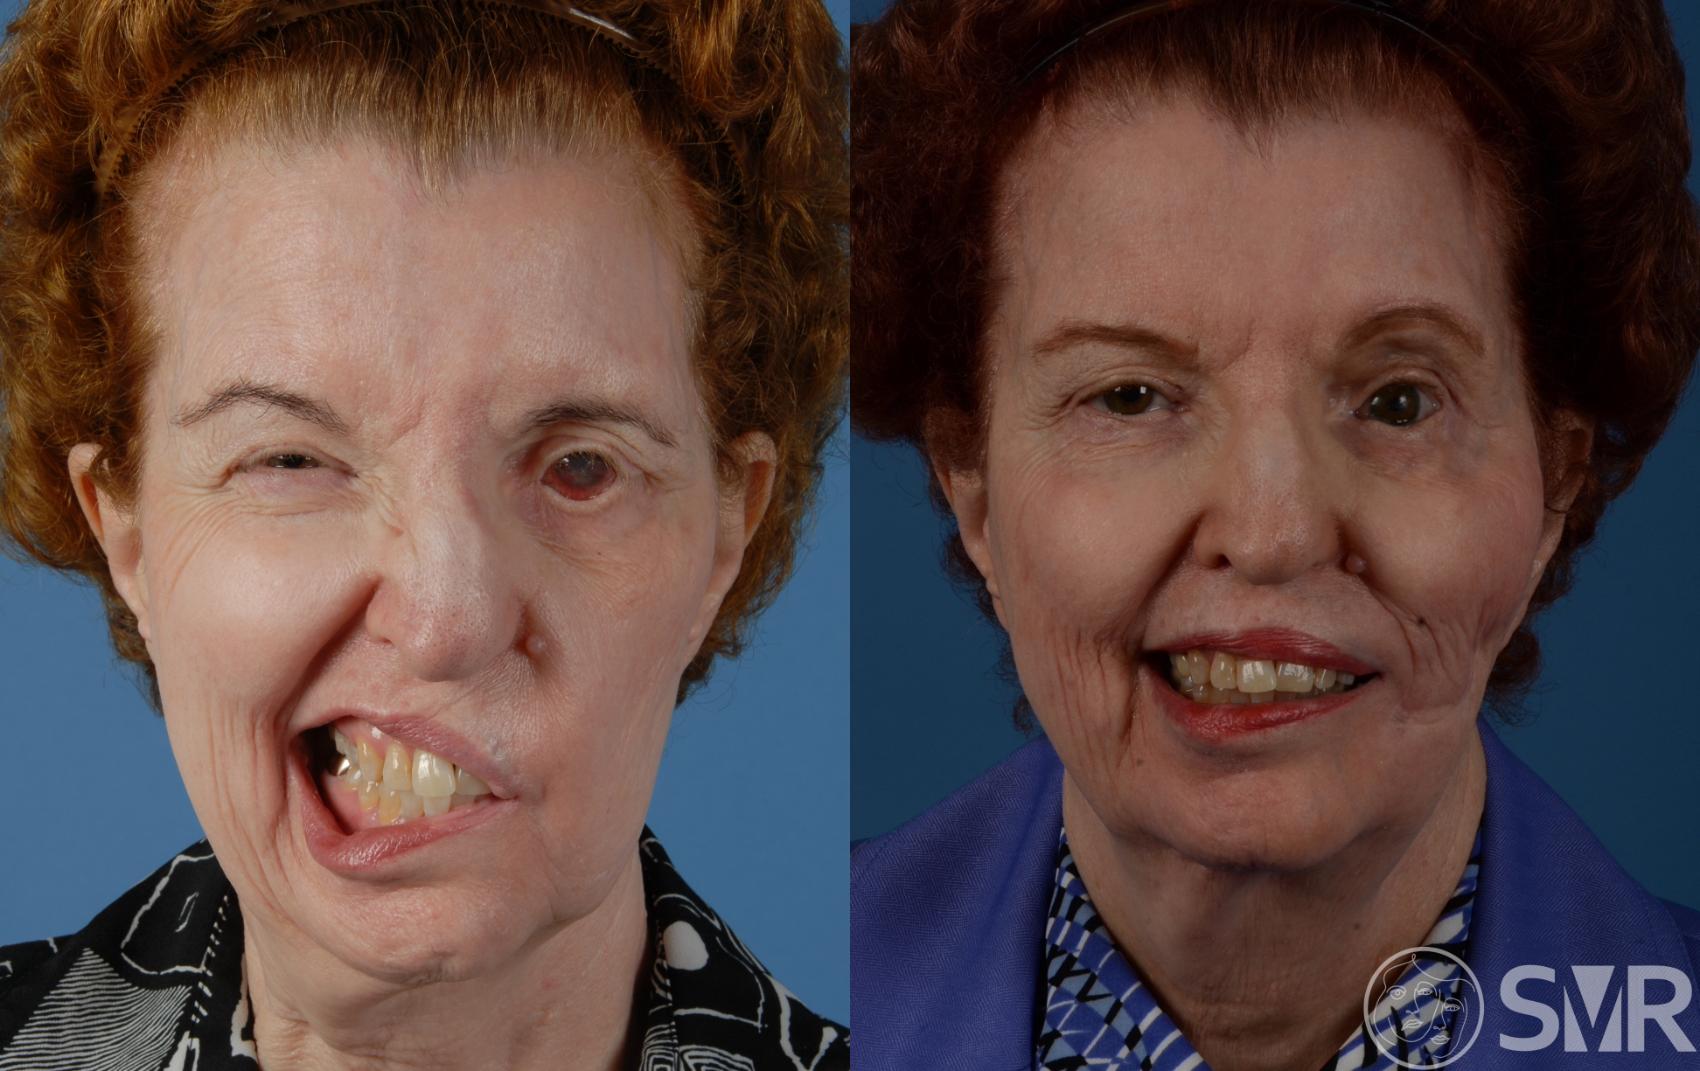 Before and 5 years after a free functional gracilis muscle transplant for smile reanimation.